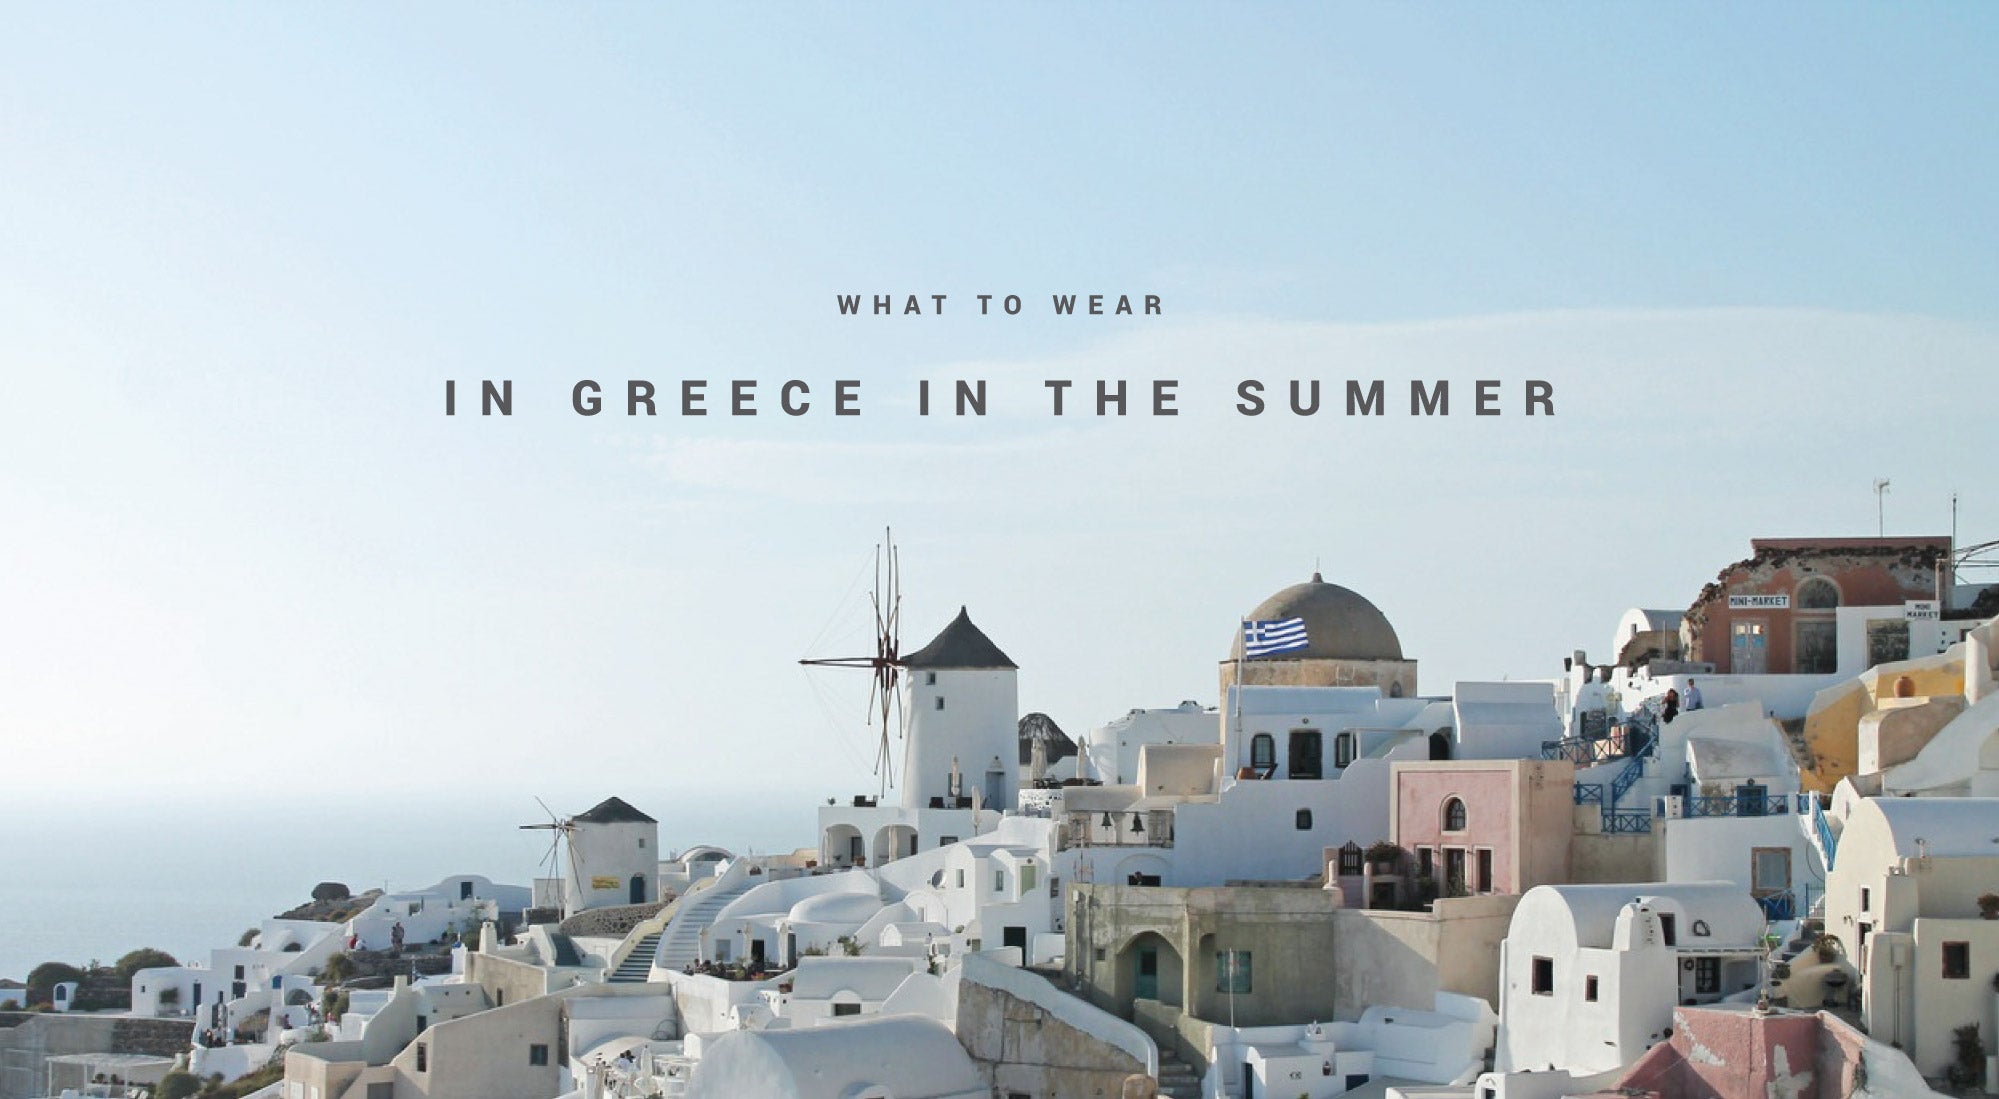 Greece Travel Essentials. Encircled creates versatile minimalist clothes with the everyday traveler in mind. Each piece is Made in Canada, out of sustainable, and eco friendly materials.